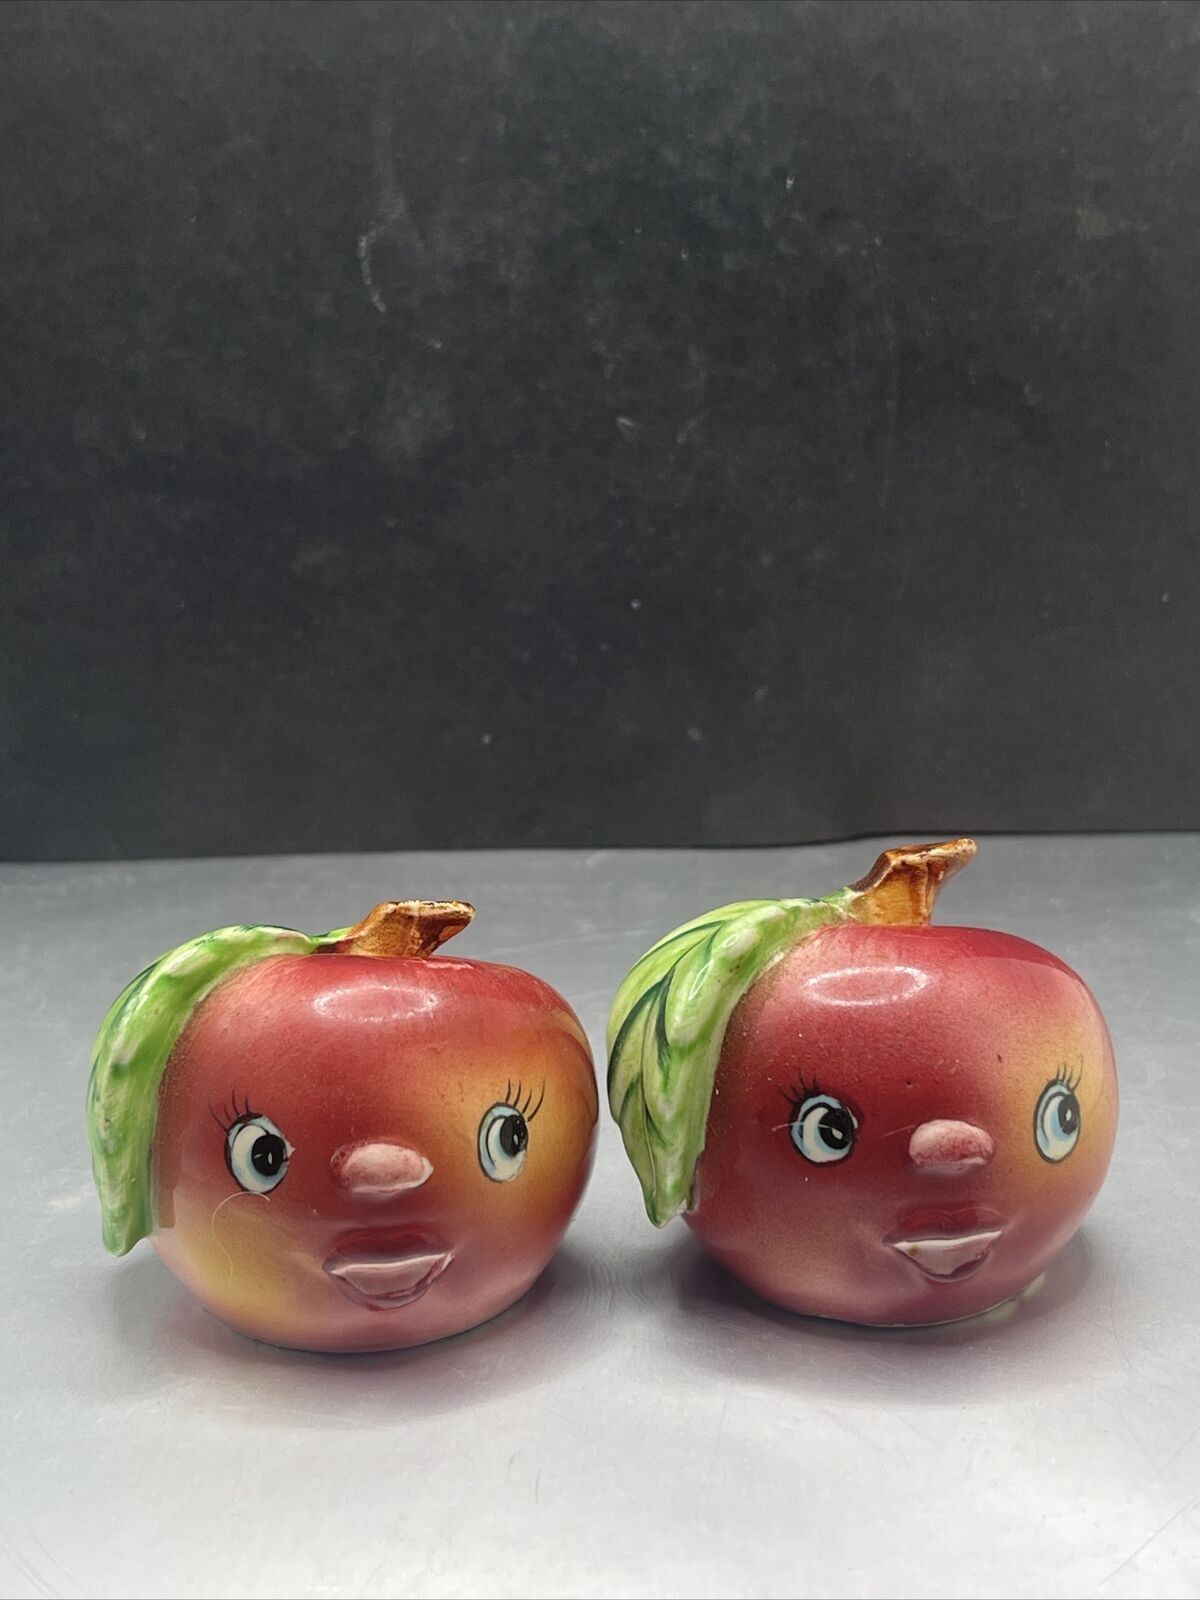 Kitschy Salt and Pepper Shakers Japan Anthropomorphic Apples Vintage Kitchen 